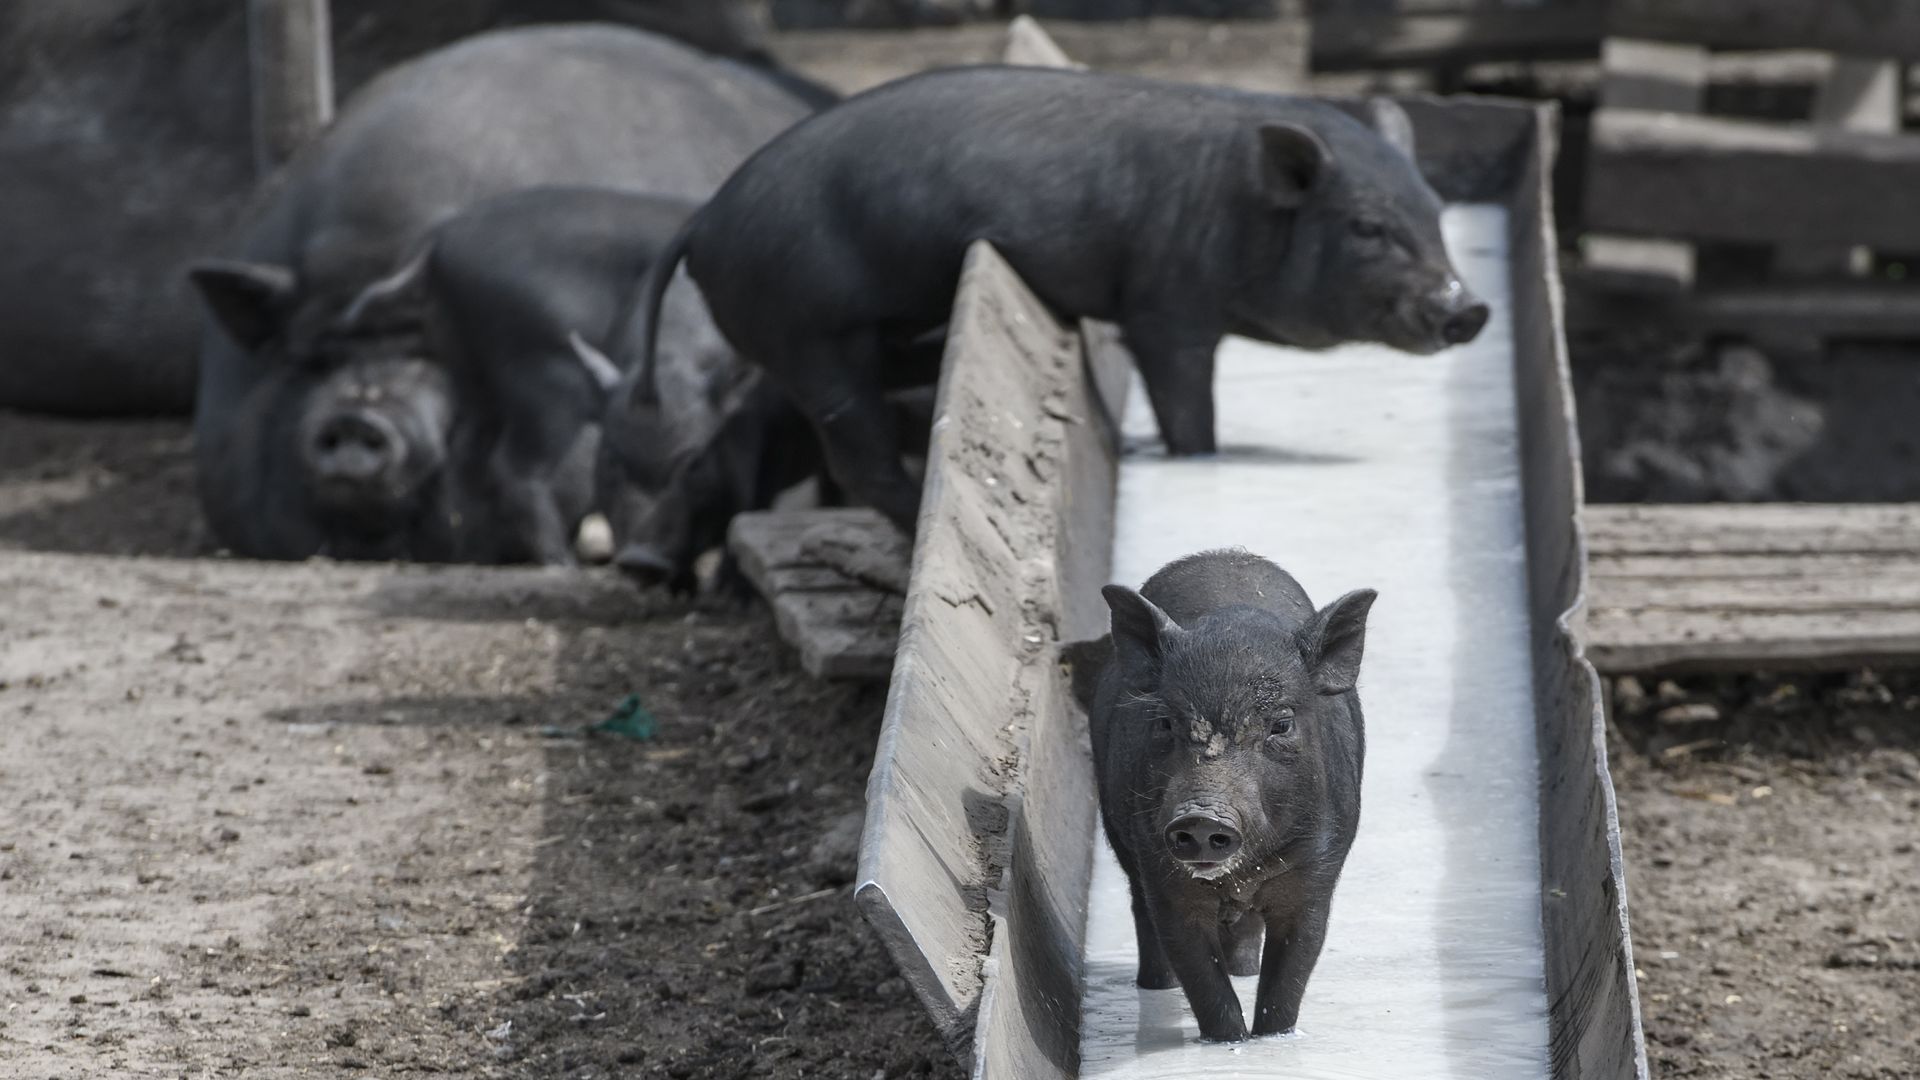 Pigs on a farm in Ukraine